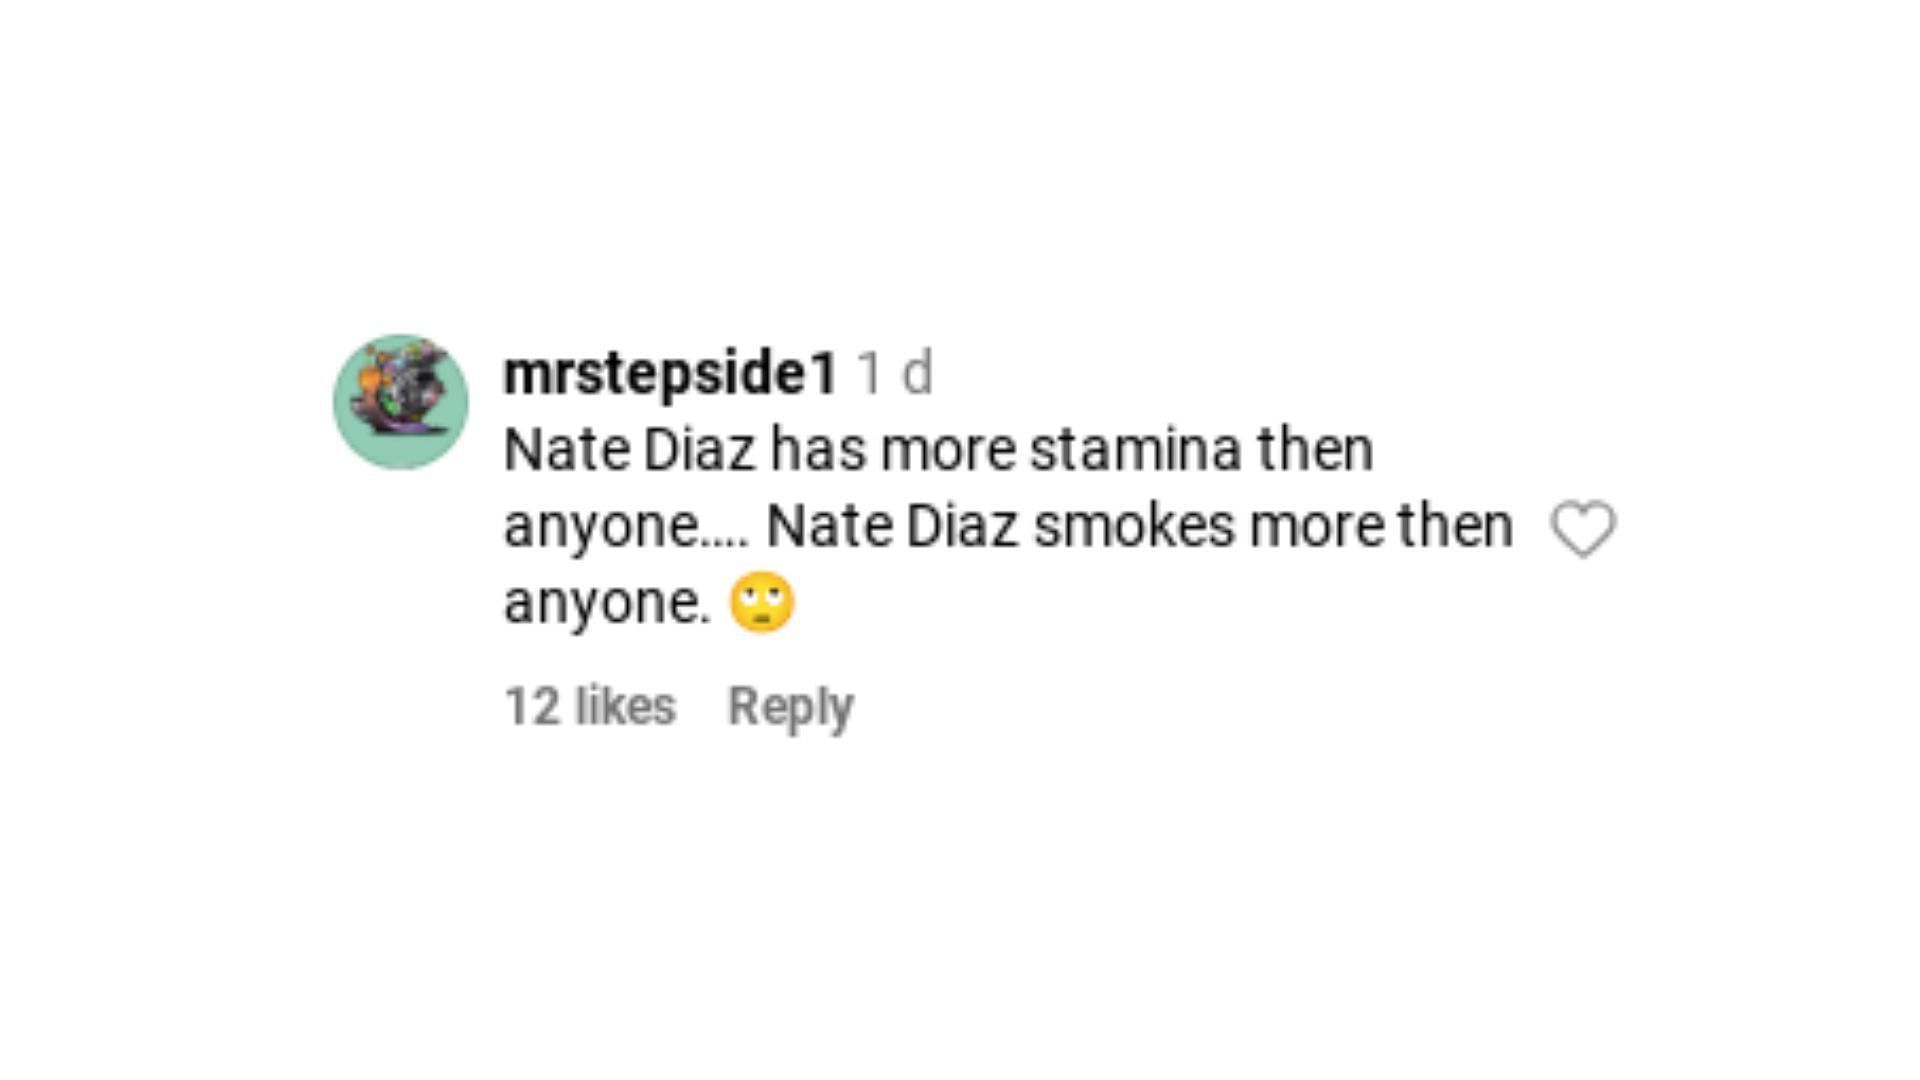 A fan referring to Nate Diaz